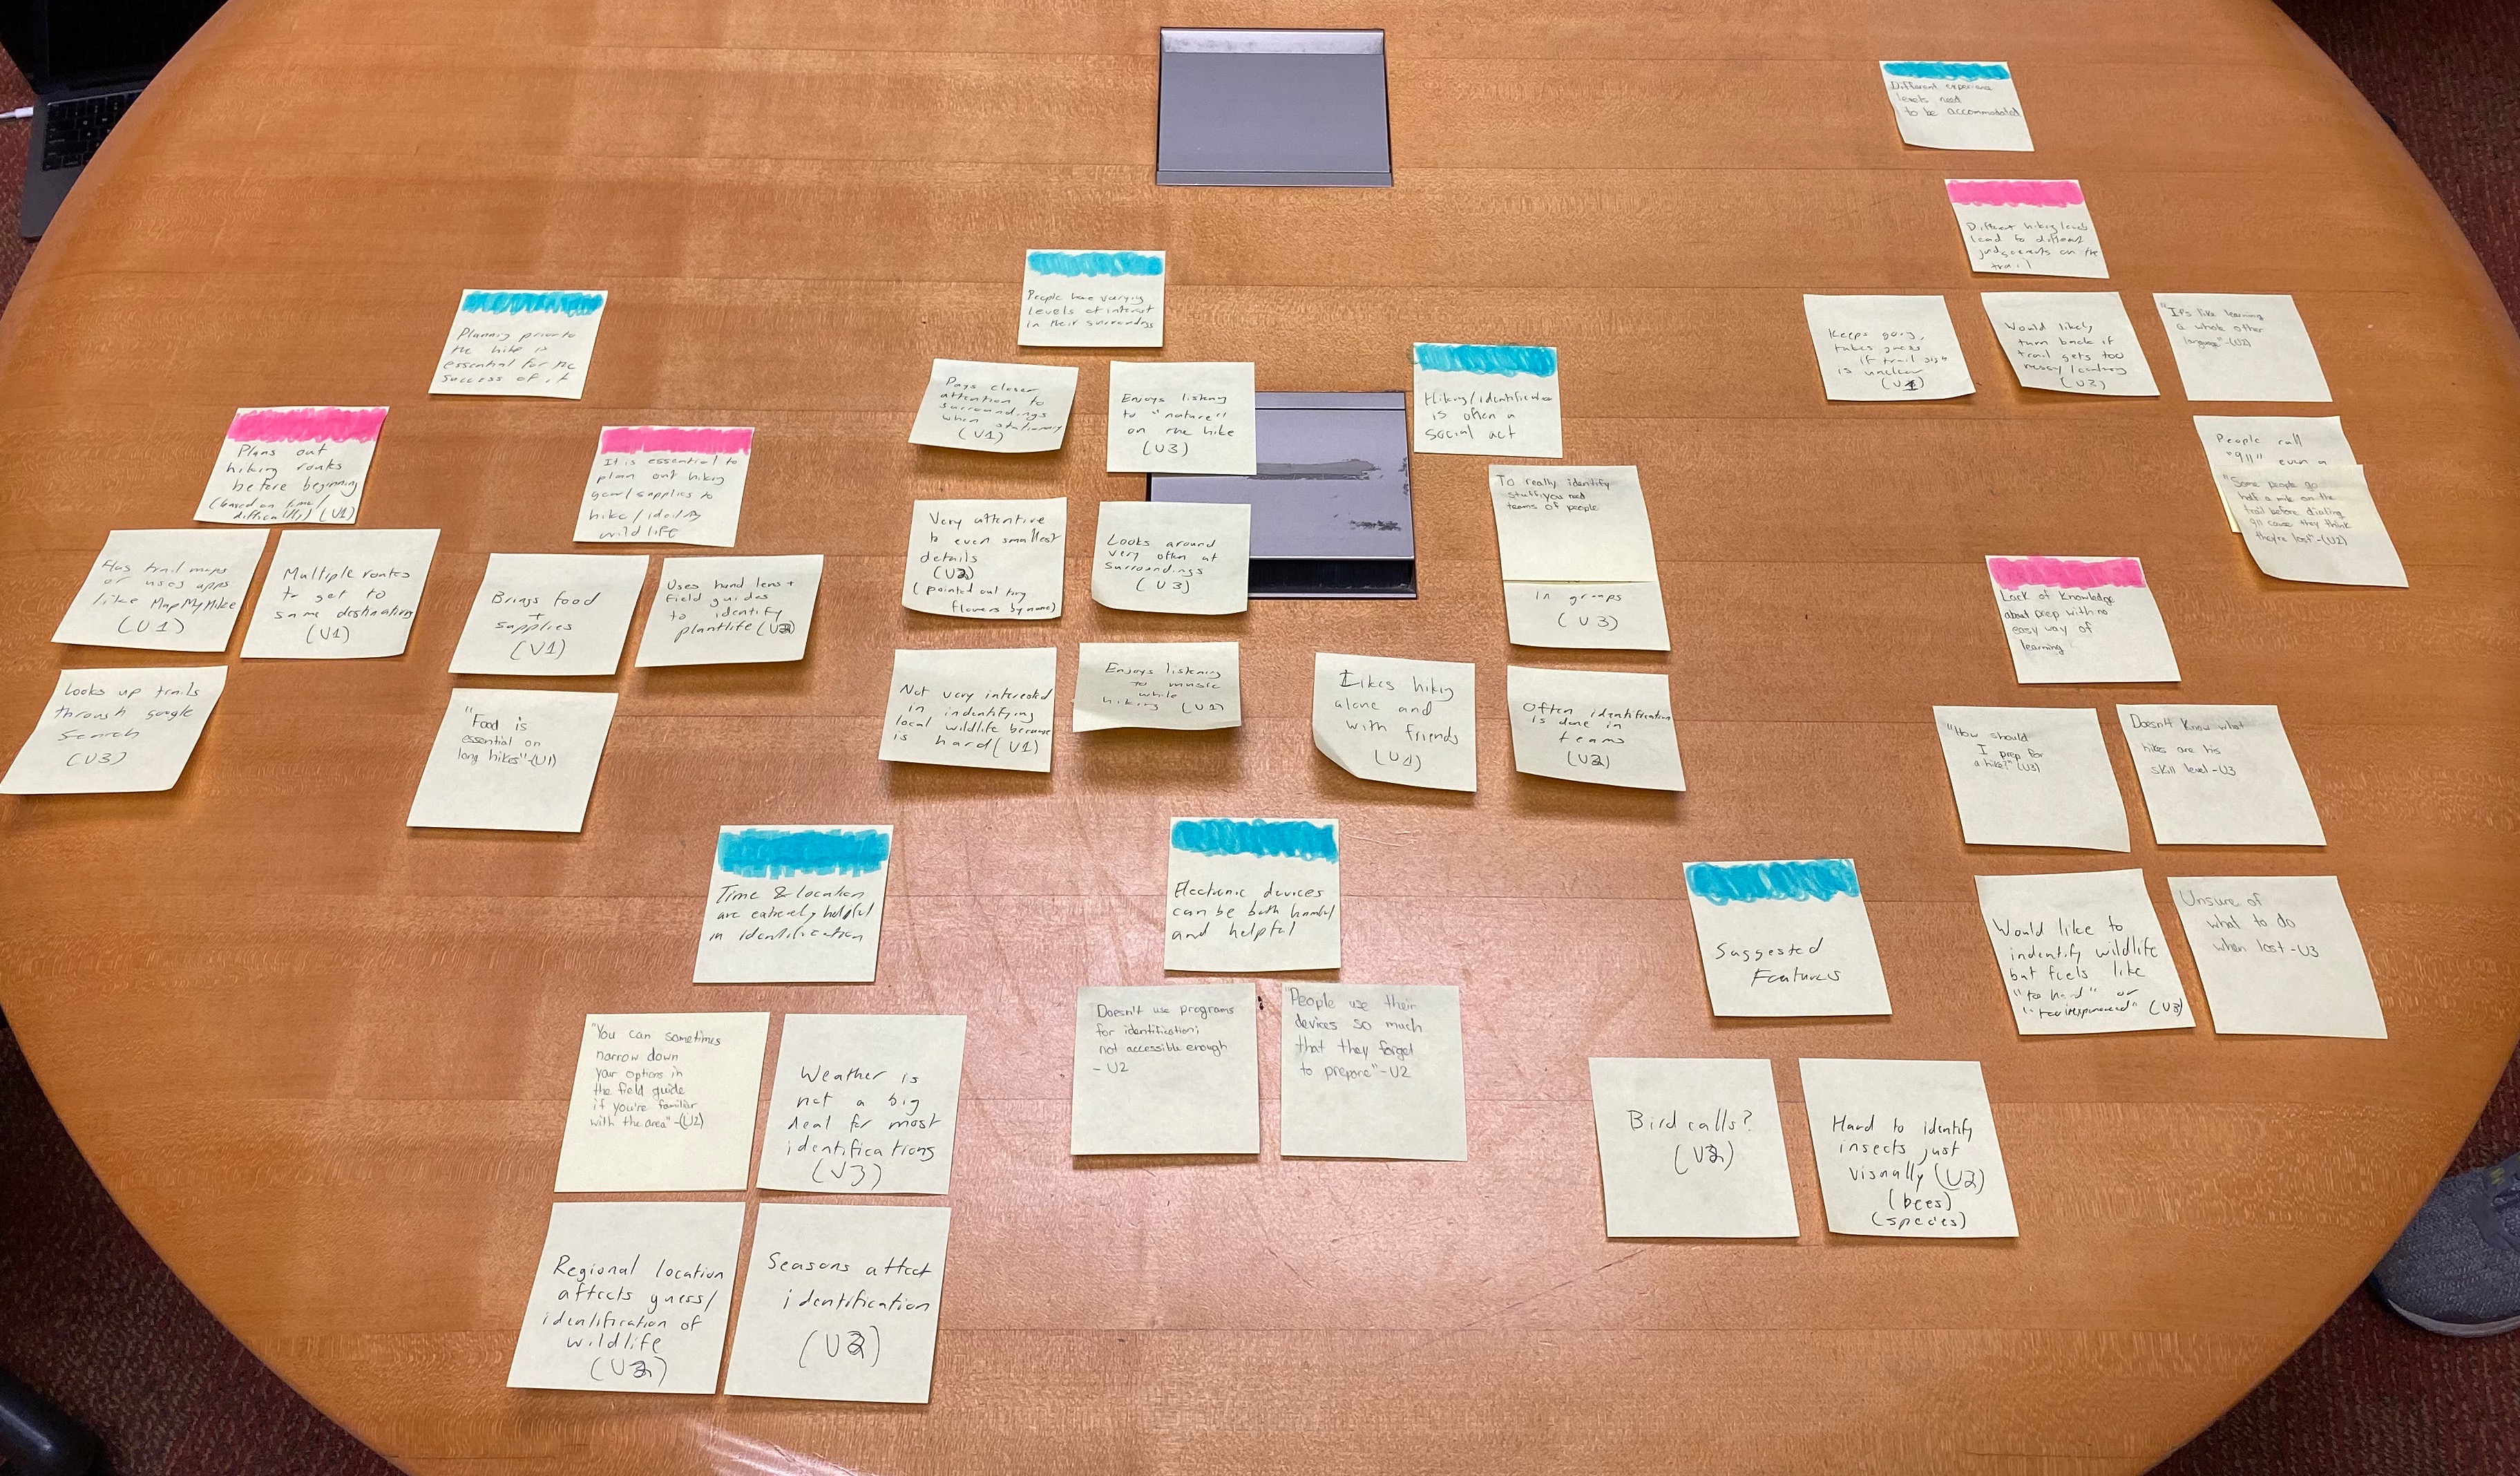 hikAR's affinity diagram which contains post-it notes depicting the themes and commonalities the team found through their inquiries